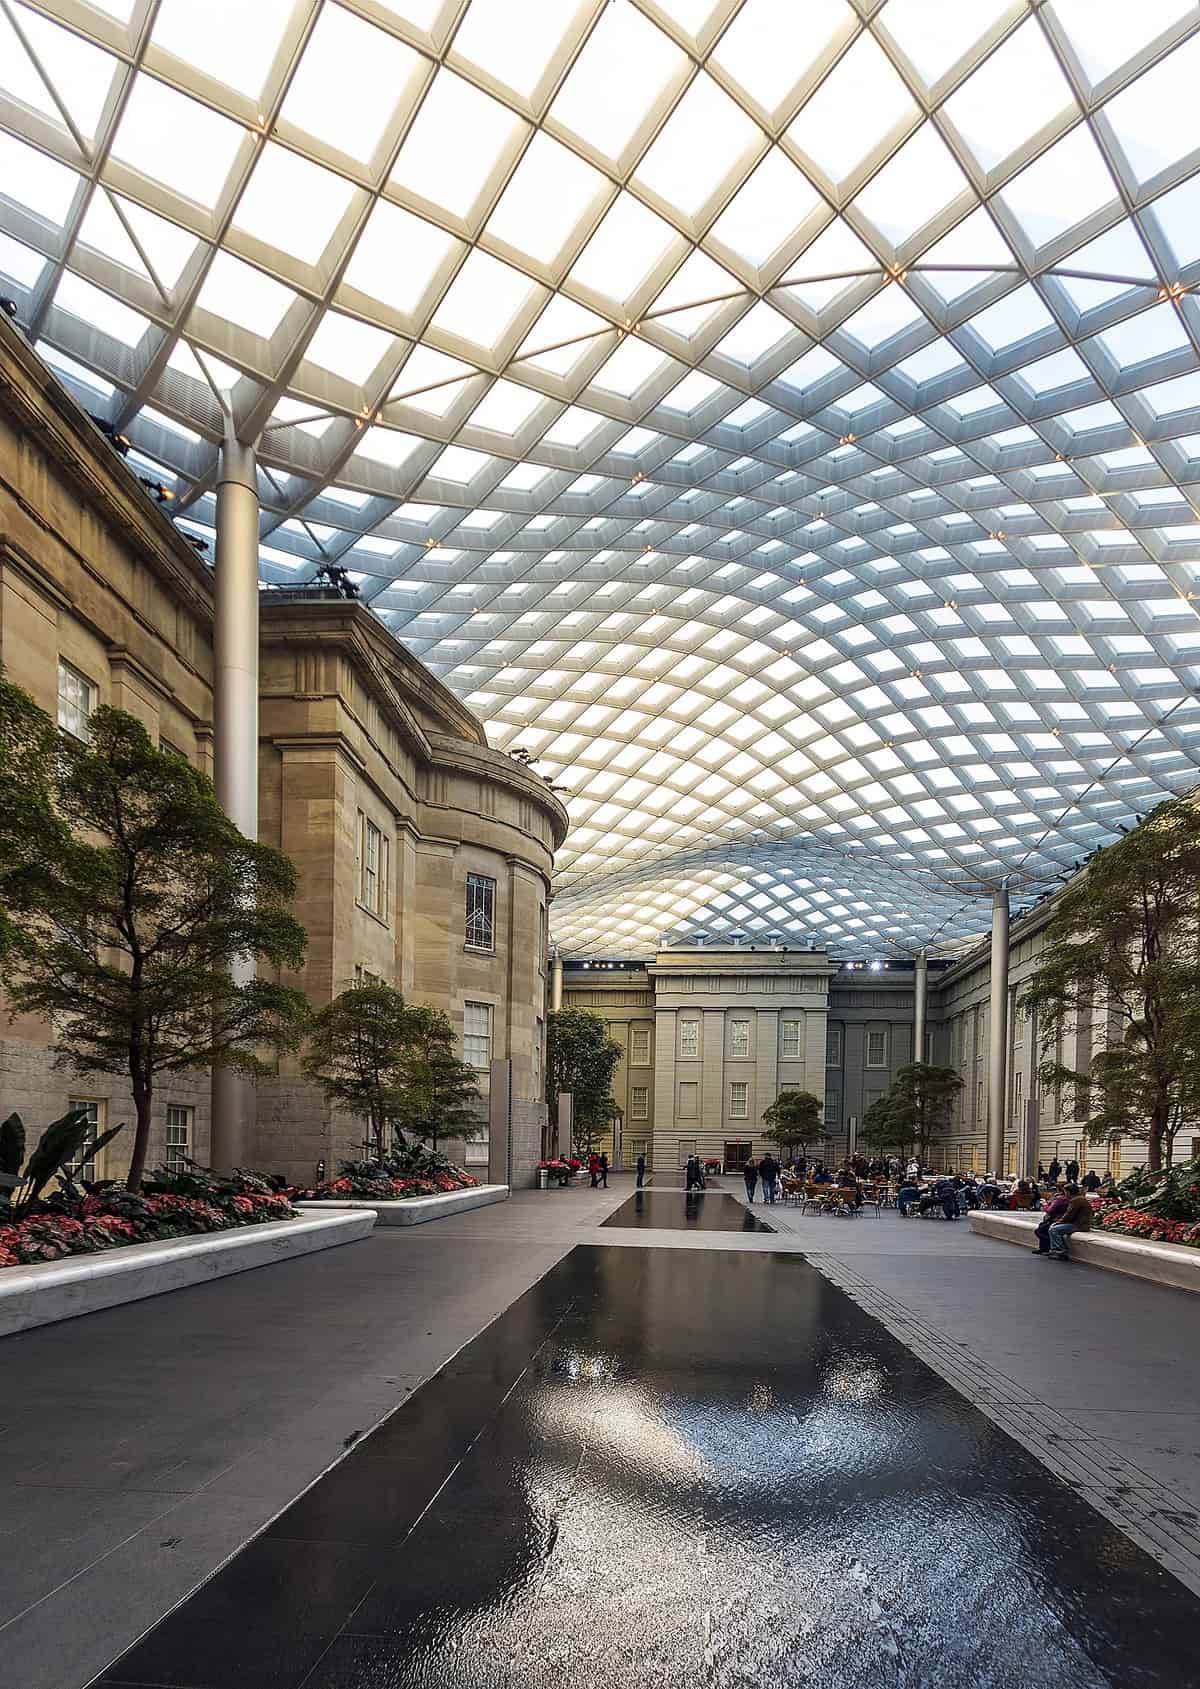 The 25 Best Museums in the US – National Portrait Gallery Washington D.C.